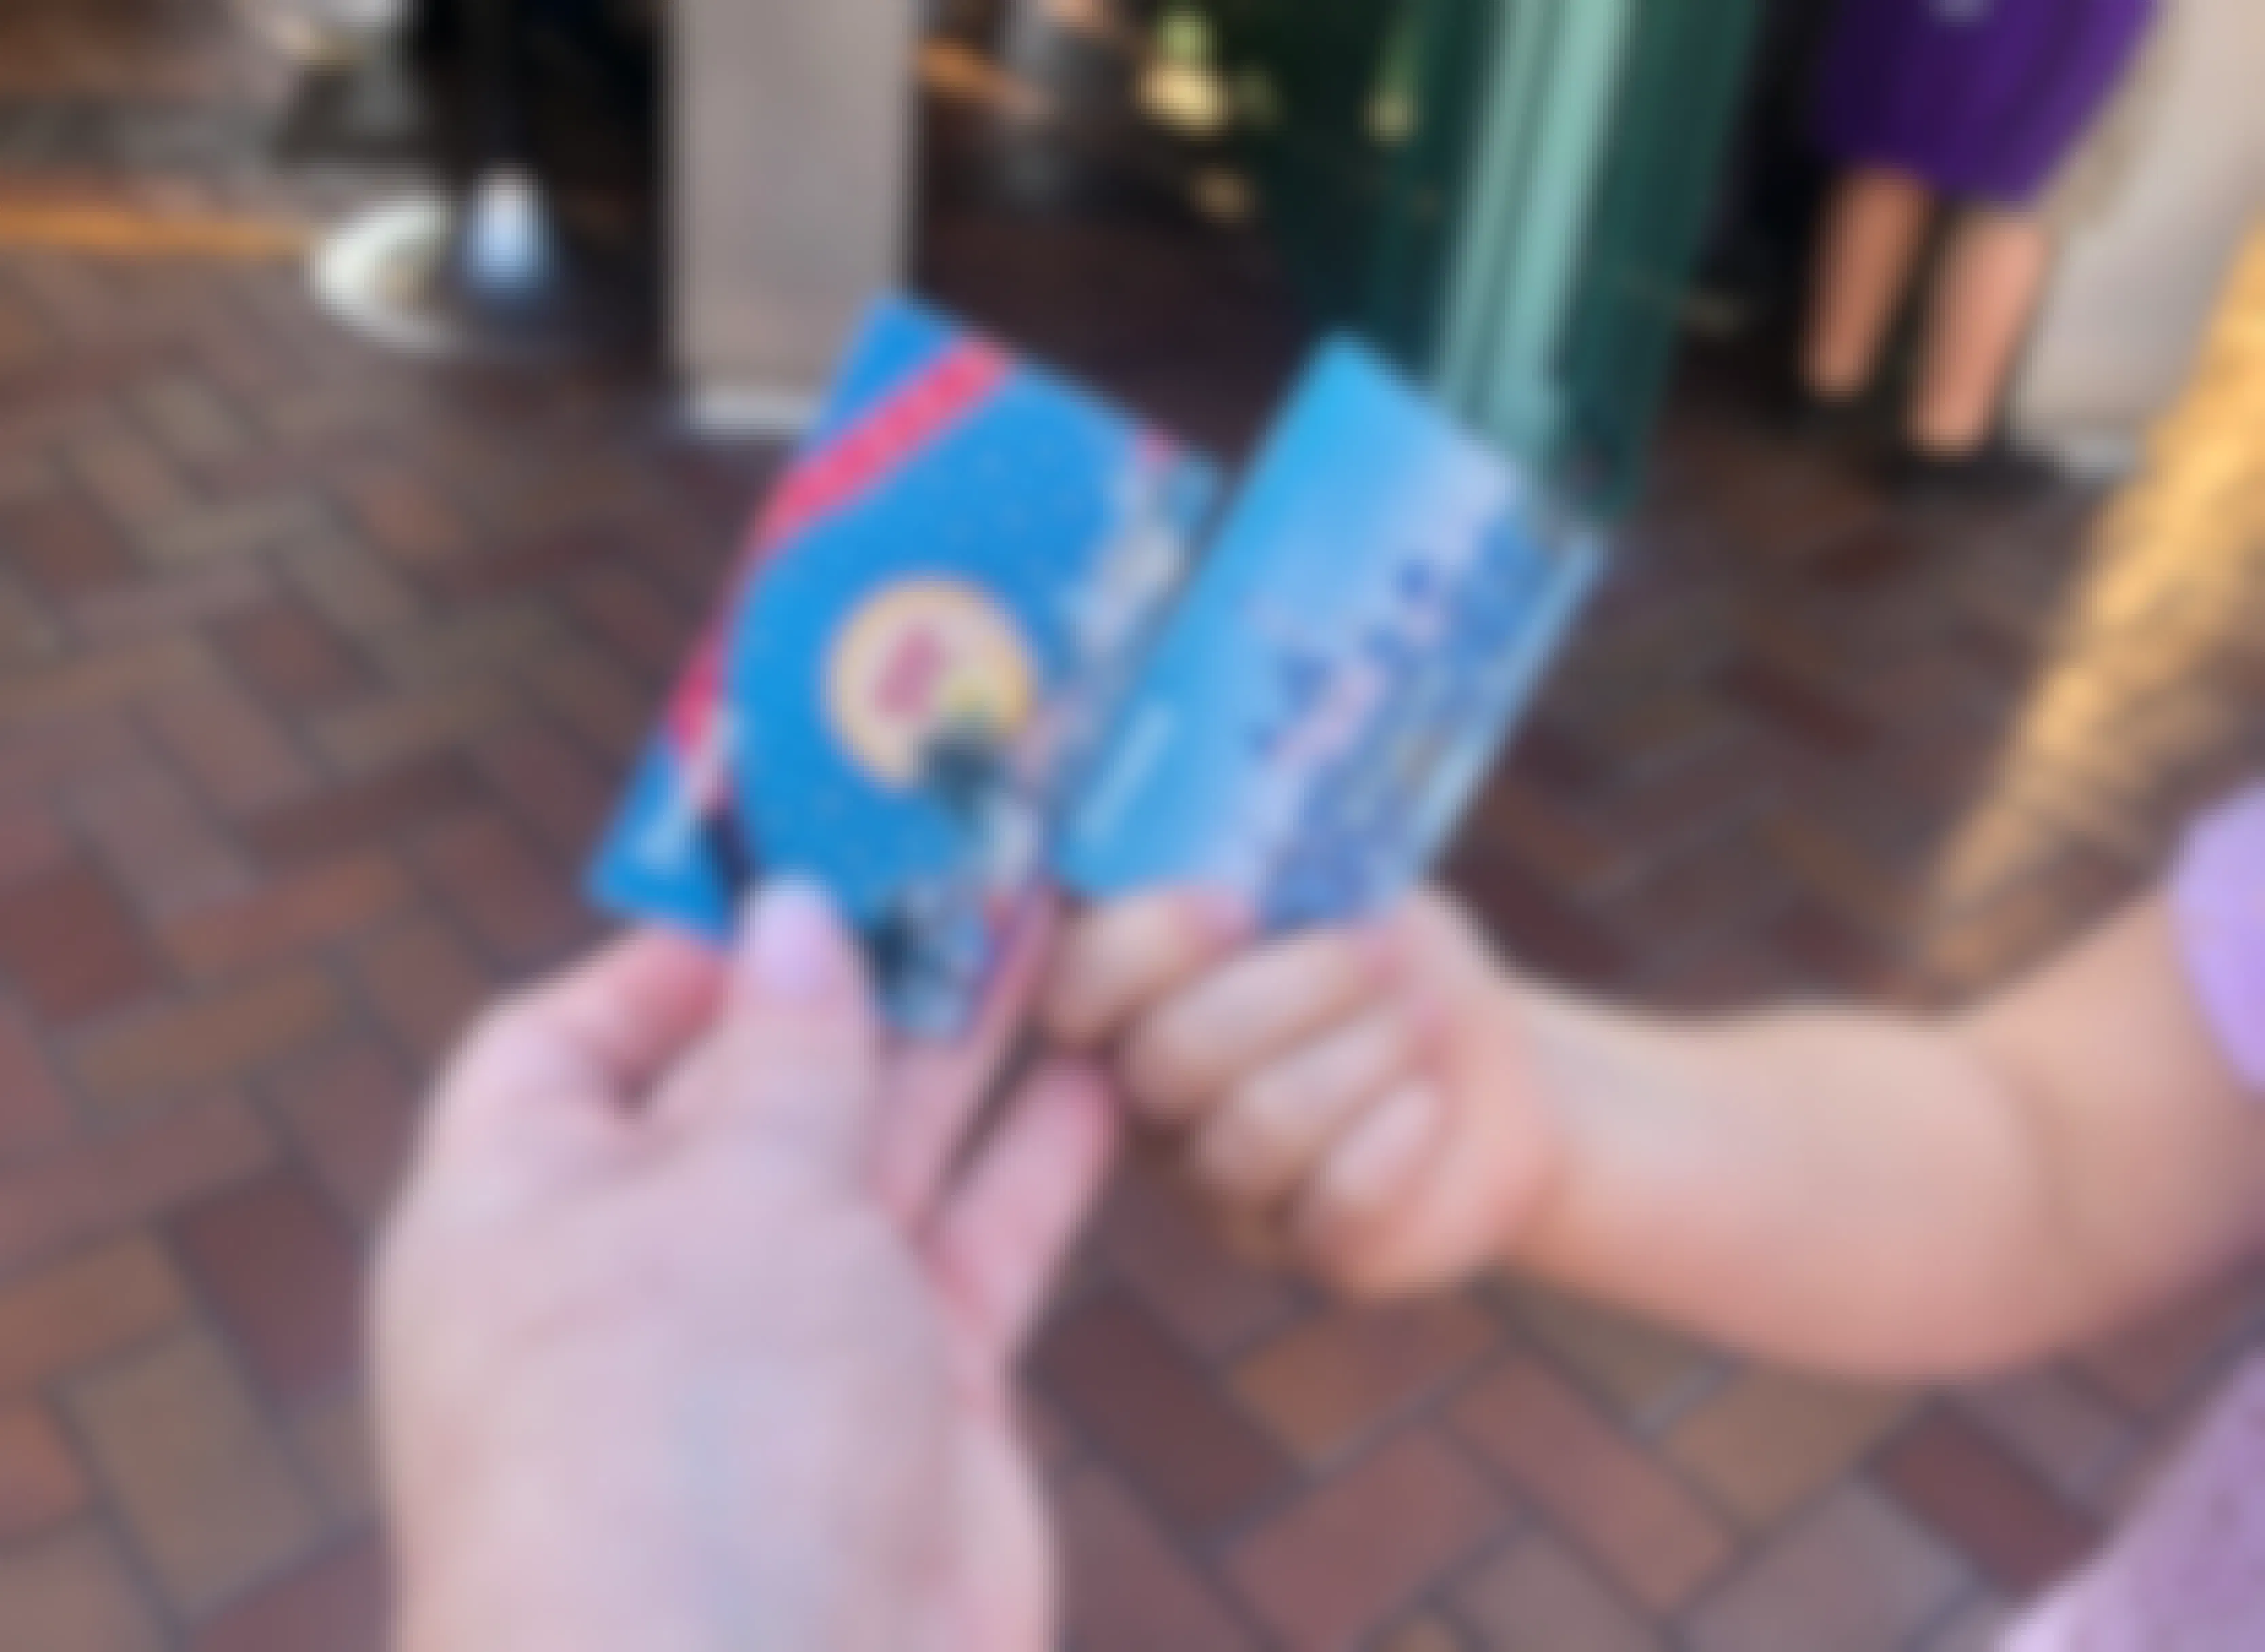 A mother and child hold up their tickets at Disneyland.